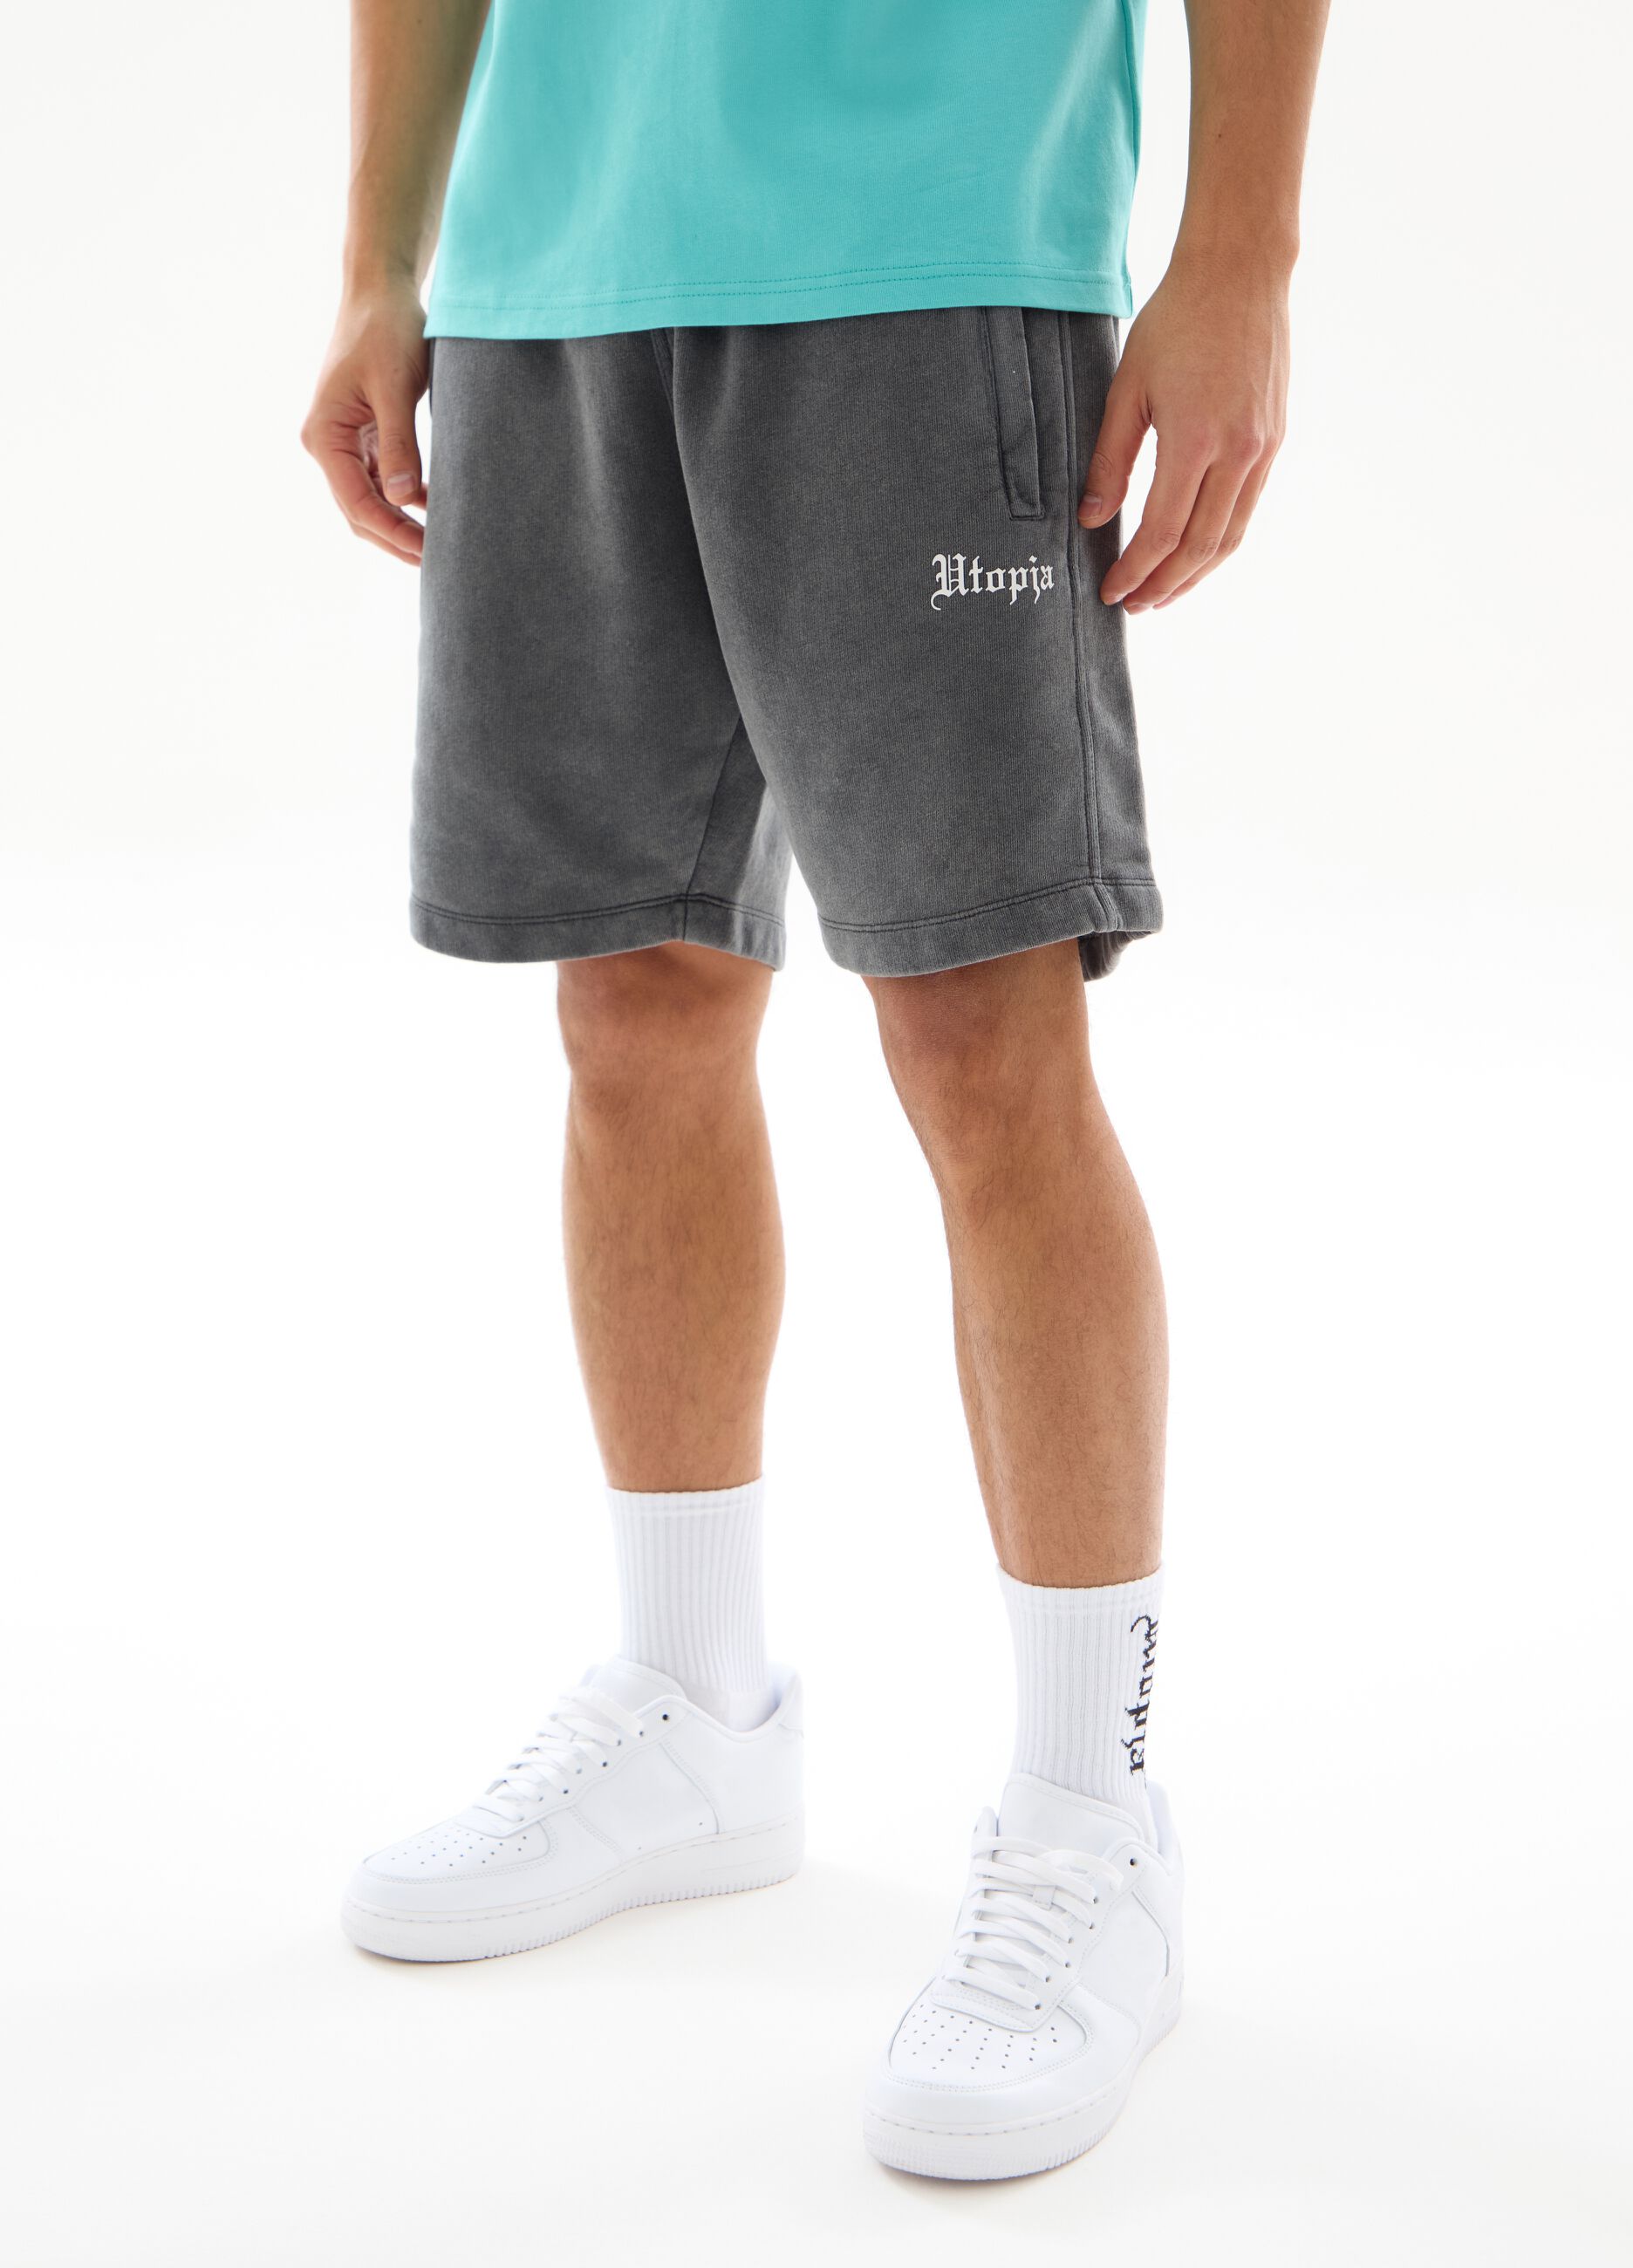 UTOPJA FOR THE SEA BEYOND Bermuda joggers with print